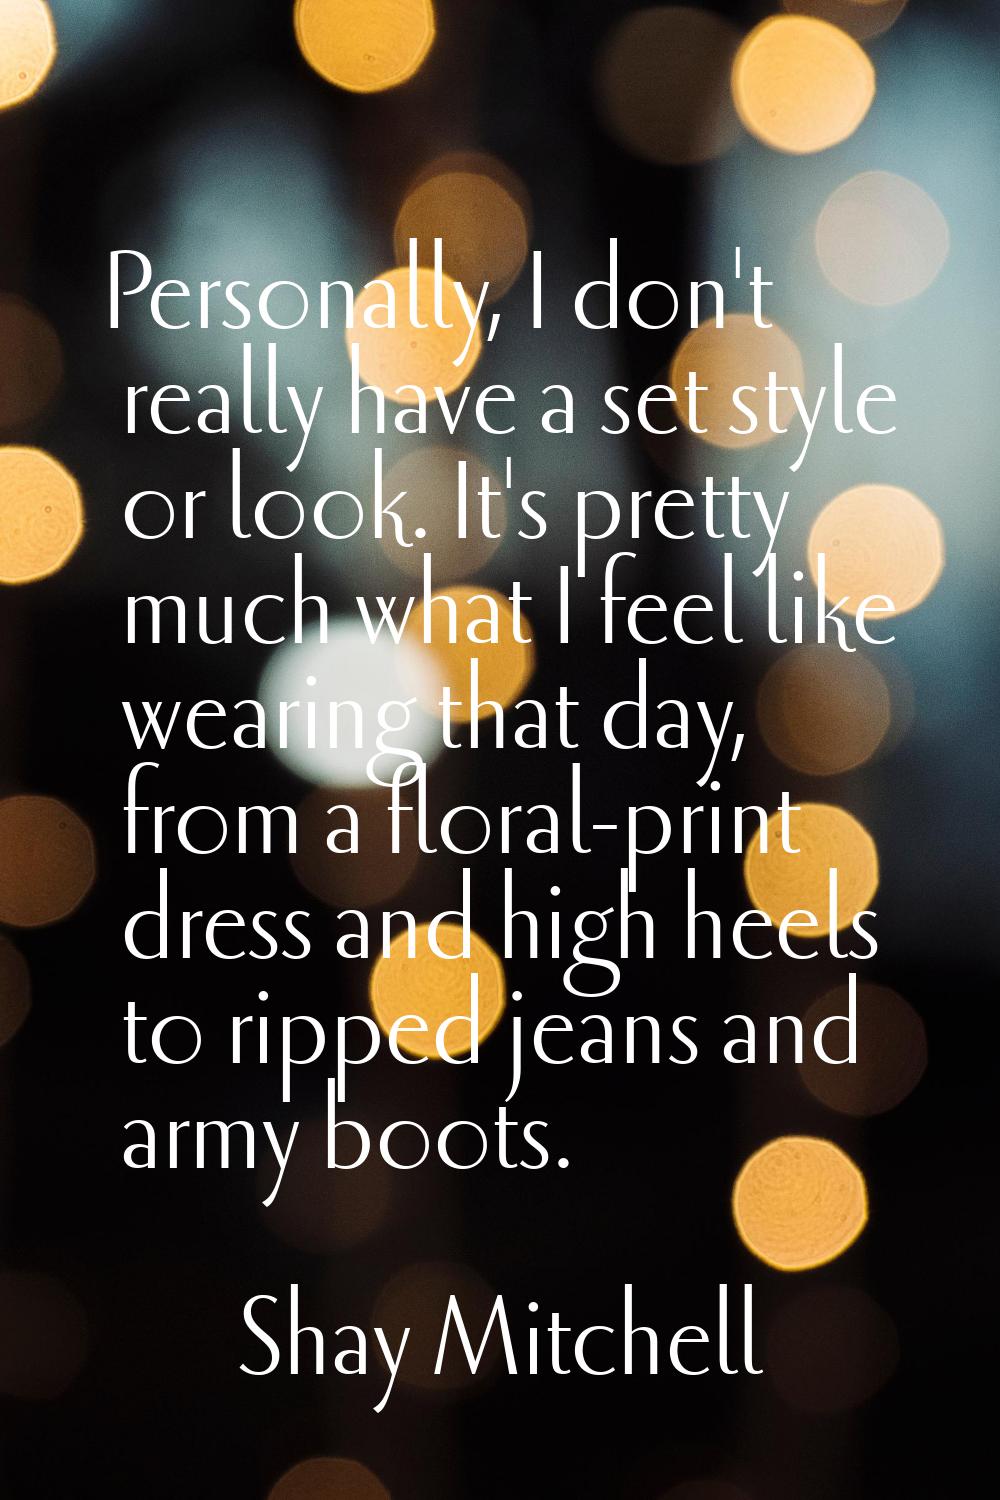 Personally, I don't really have a set style or look. It's pretty much what I feel like wearing that